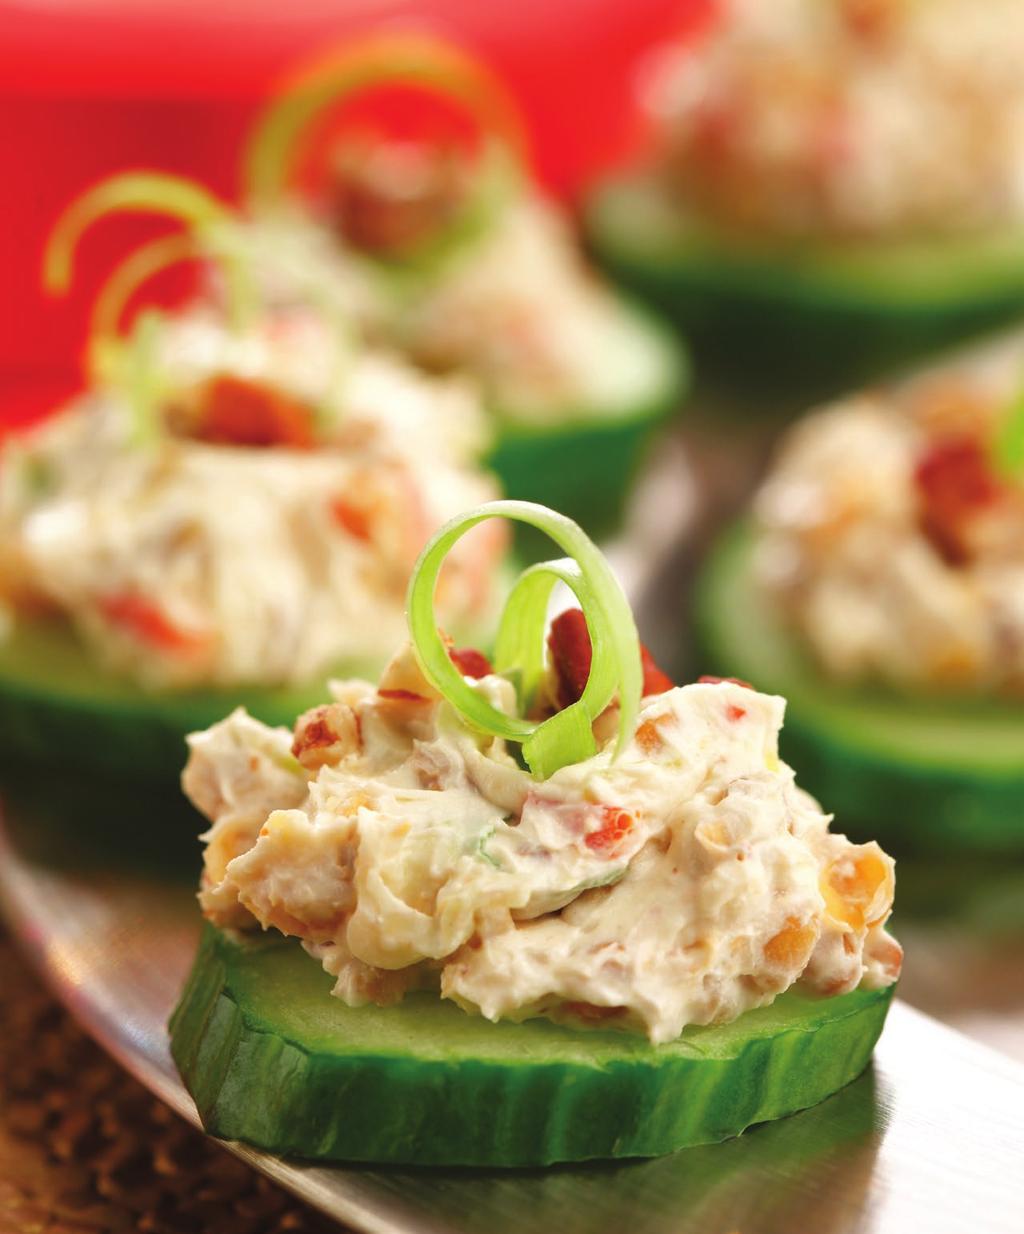 CREAMY LENTIL & PECAN CUCUMBER TOPPERS 1-2 whole cucumber(s), sliced into 1/4 thick rounds 1 (8 oz) pkg cream cheese, room temperature 3/4 cup (180 ml) cooked green lentils 1/3 cup (80 ml) finely